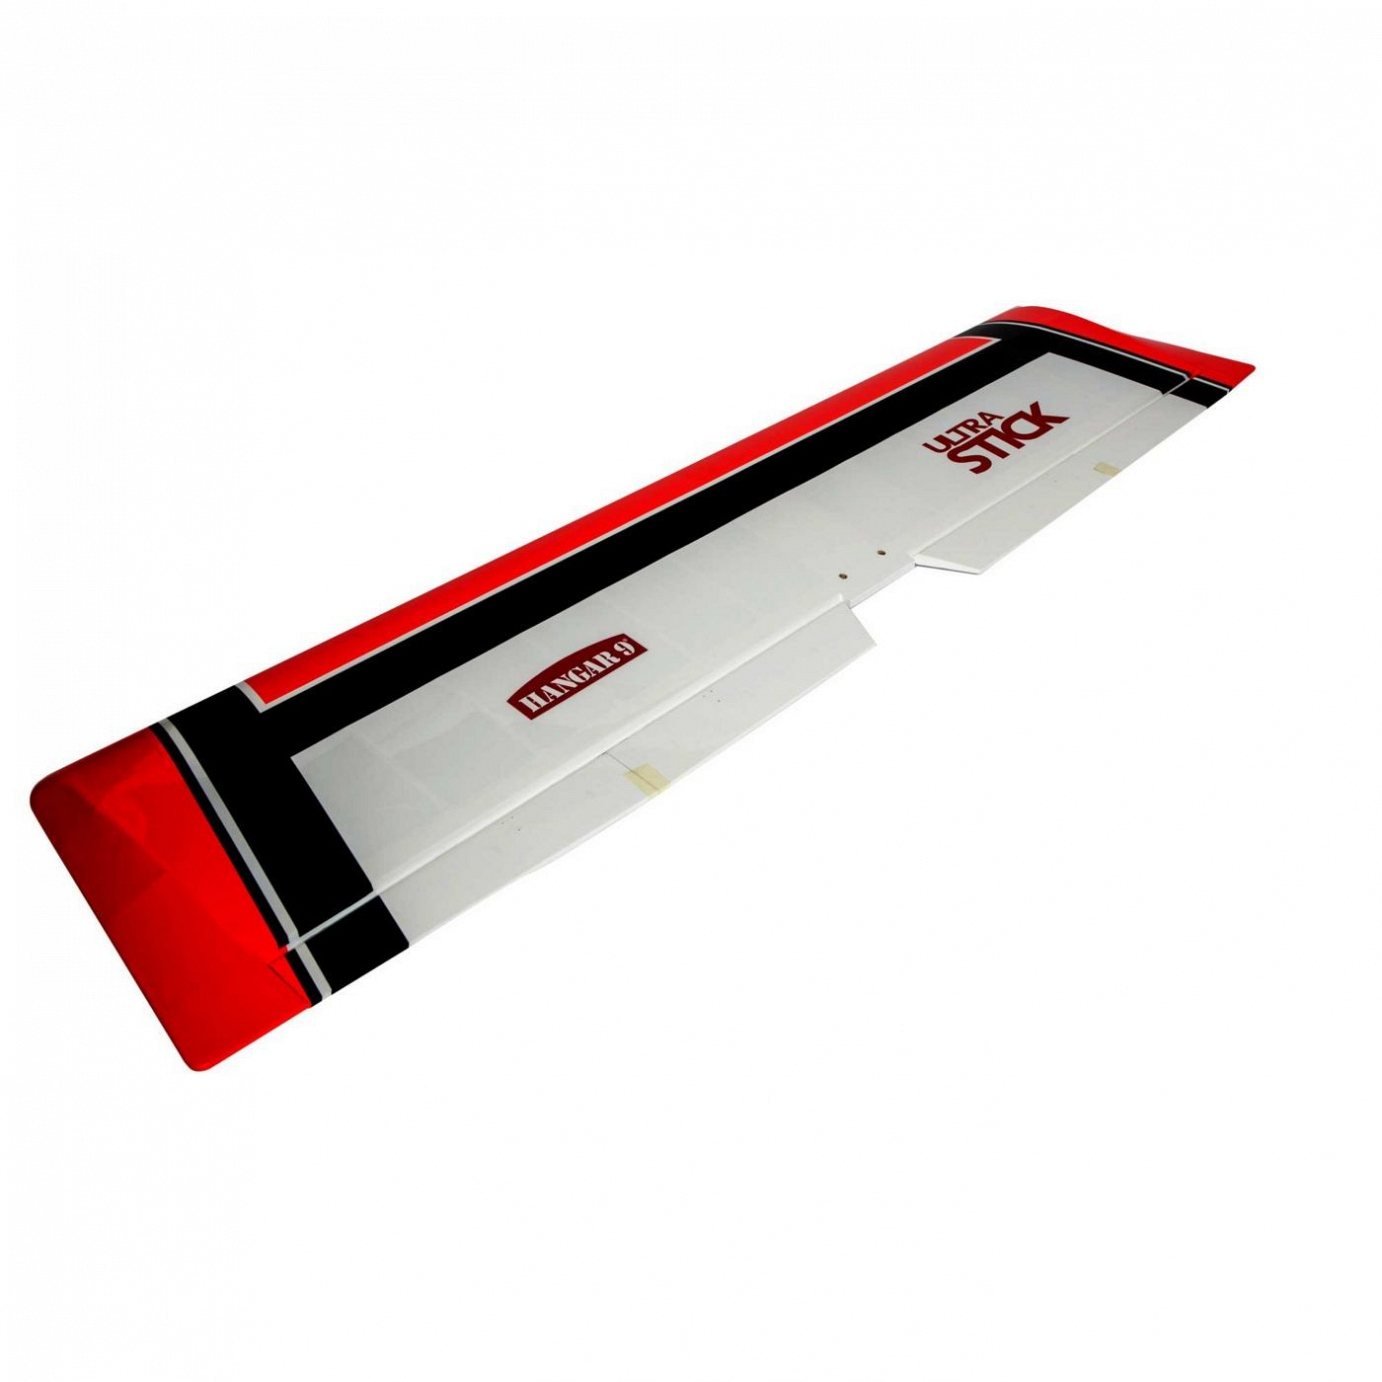 Hangar 9 Wing with Ailerons and Flaps, Ultra Stick 10cc